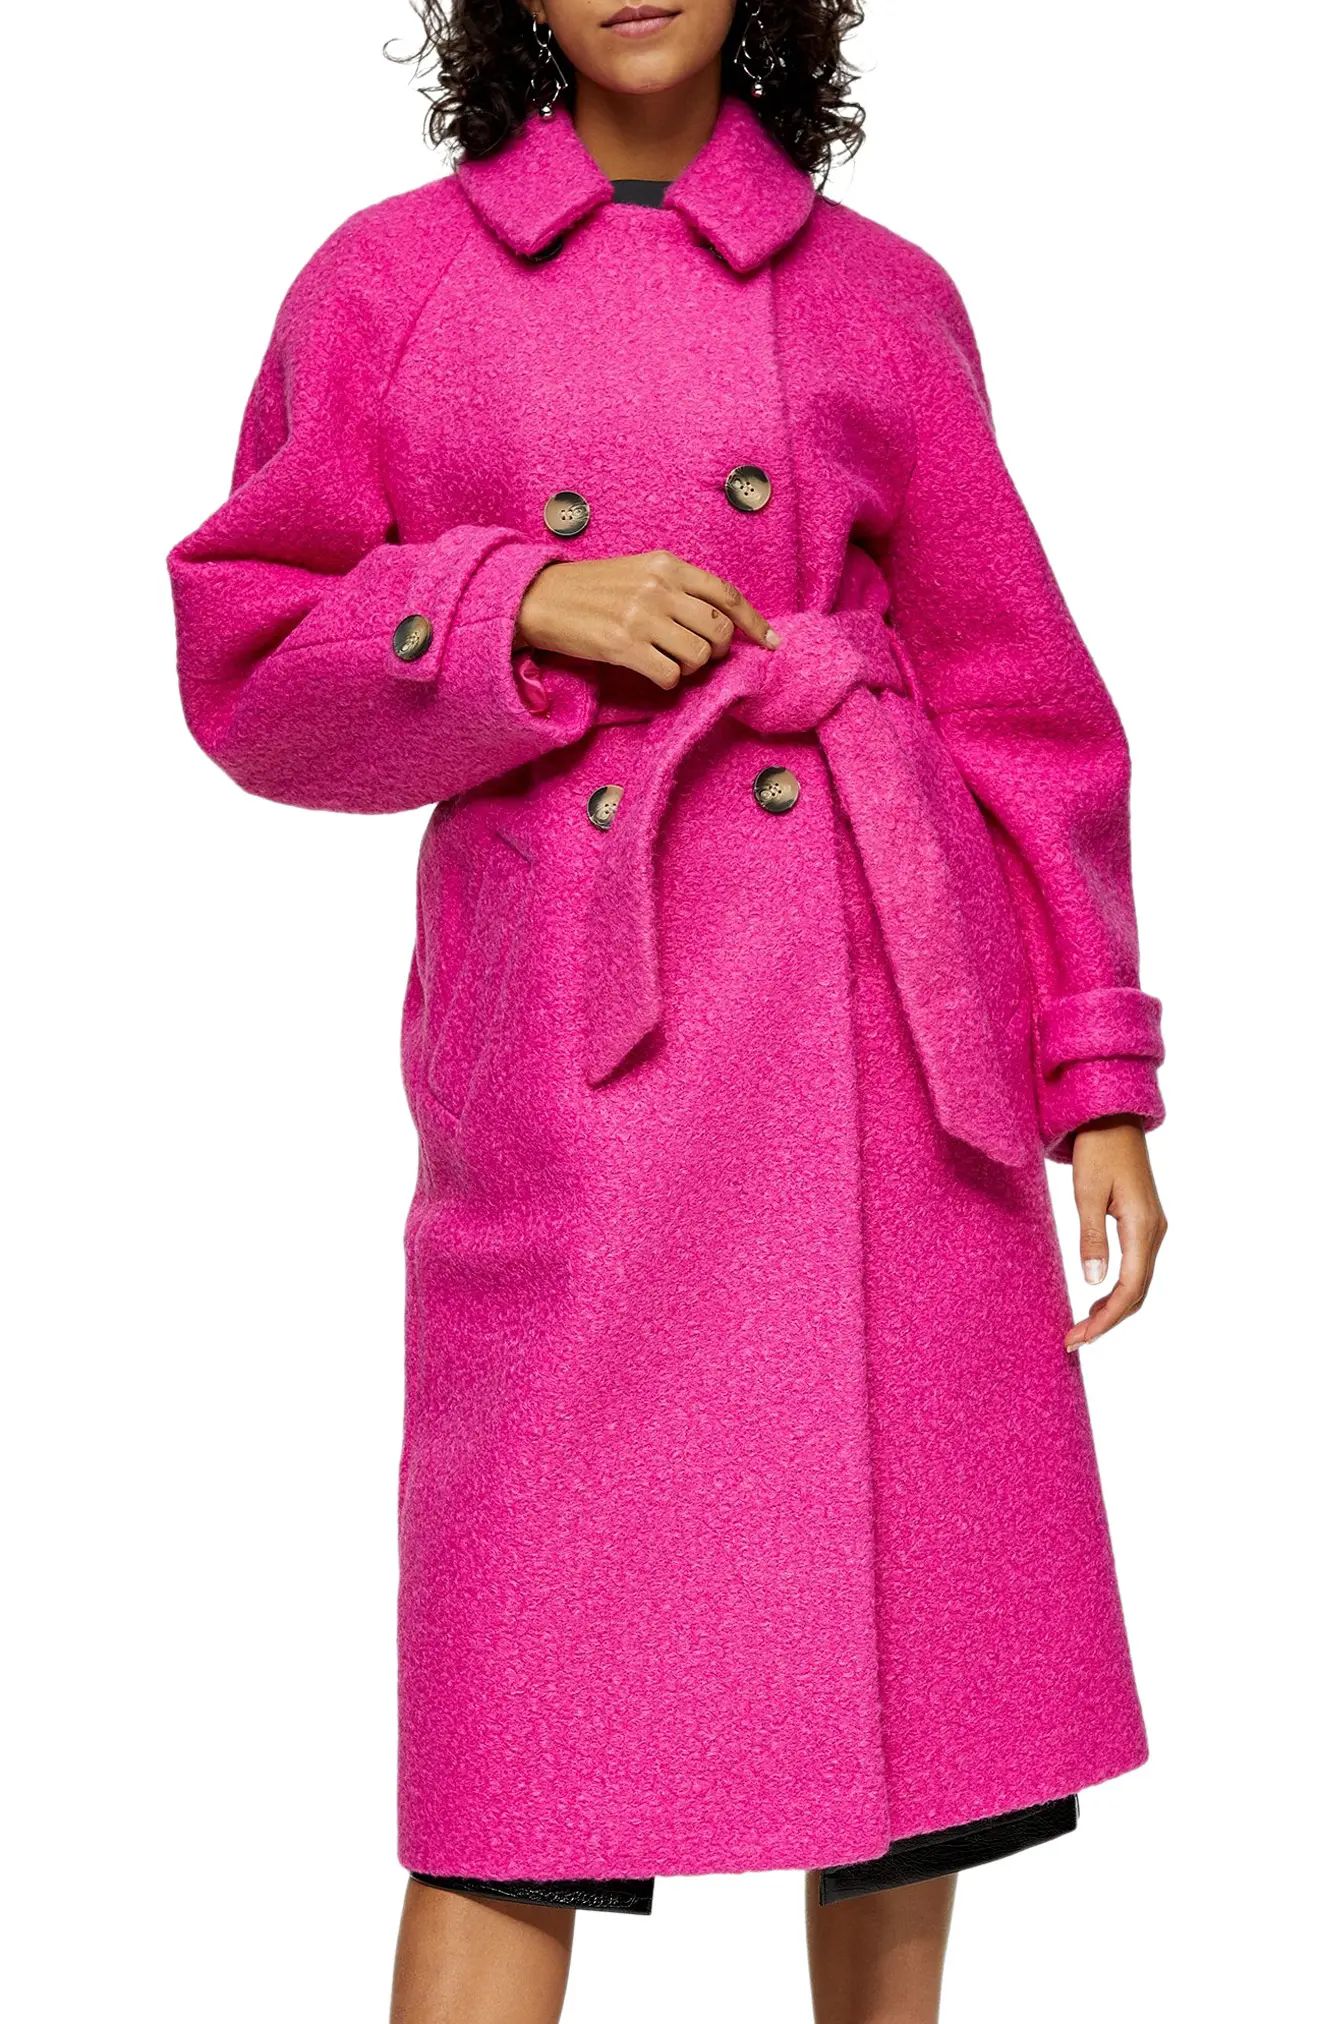 Women's Topshop Arin Boucle Trench Coat, Size 2 US - Pink | Nordstrom